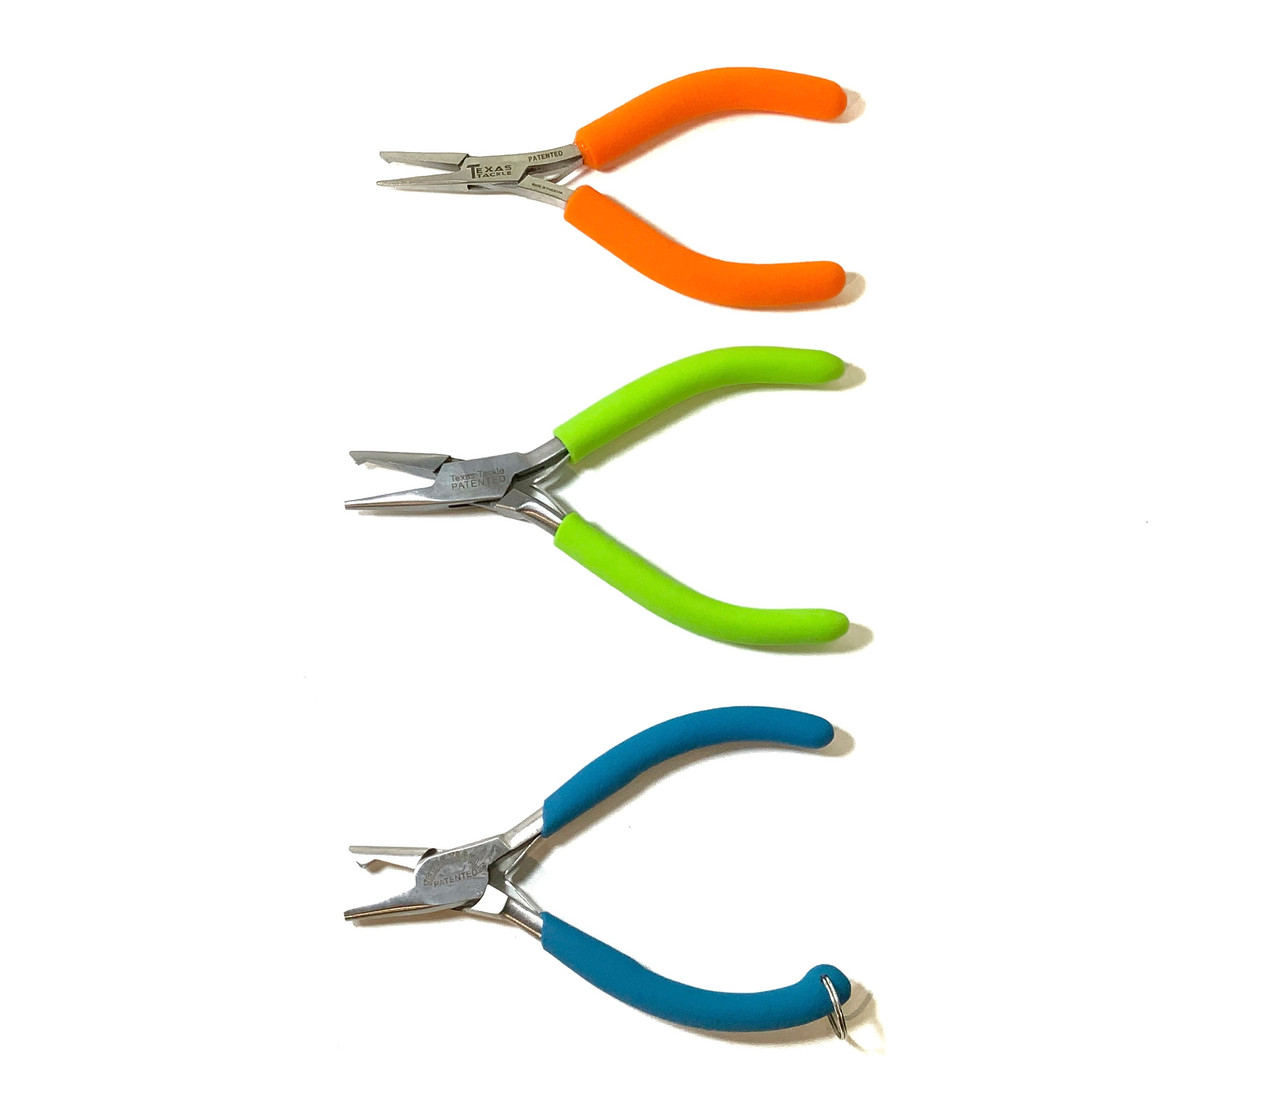 Smith's 51171 Smiths Fishing Pliers Carbon Steel, 1 - Kroger